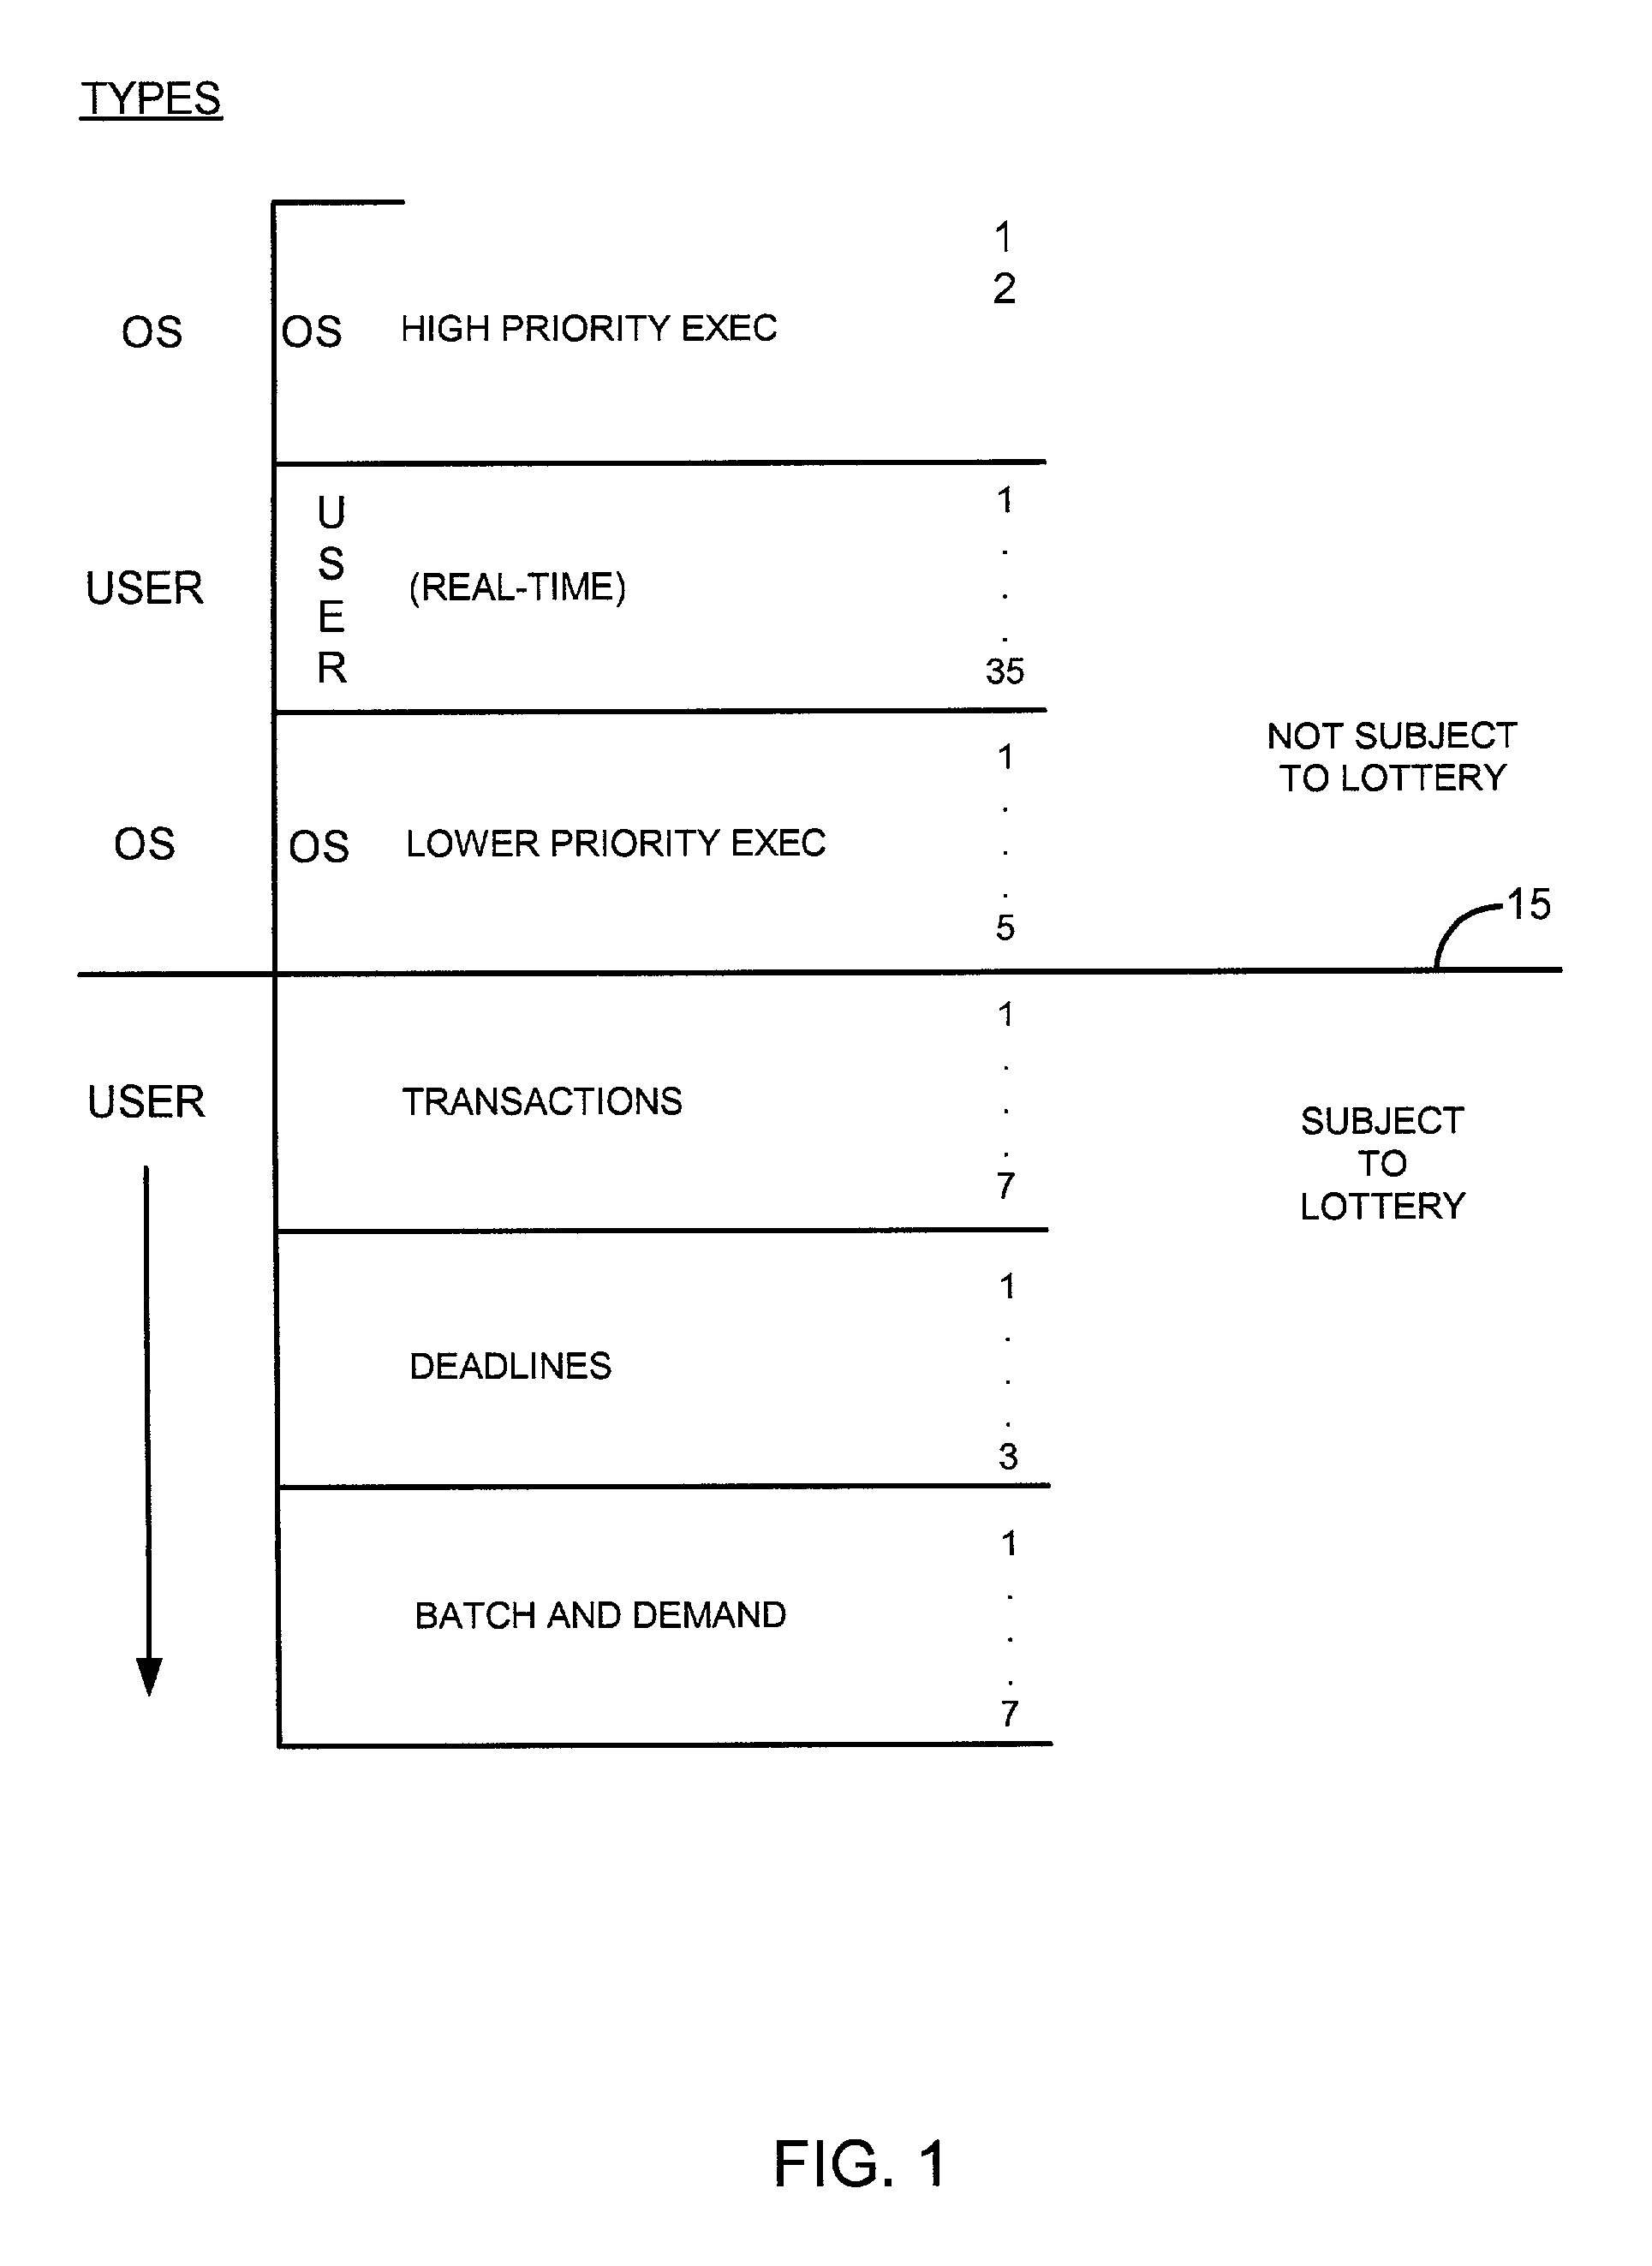 Operating system scheduler/dispatcher with randomized resource allocation and user manipulable weightings